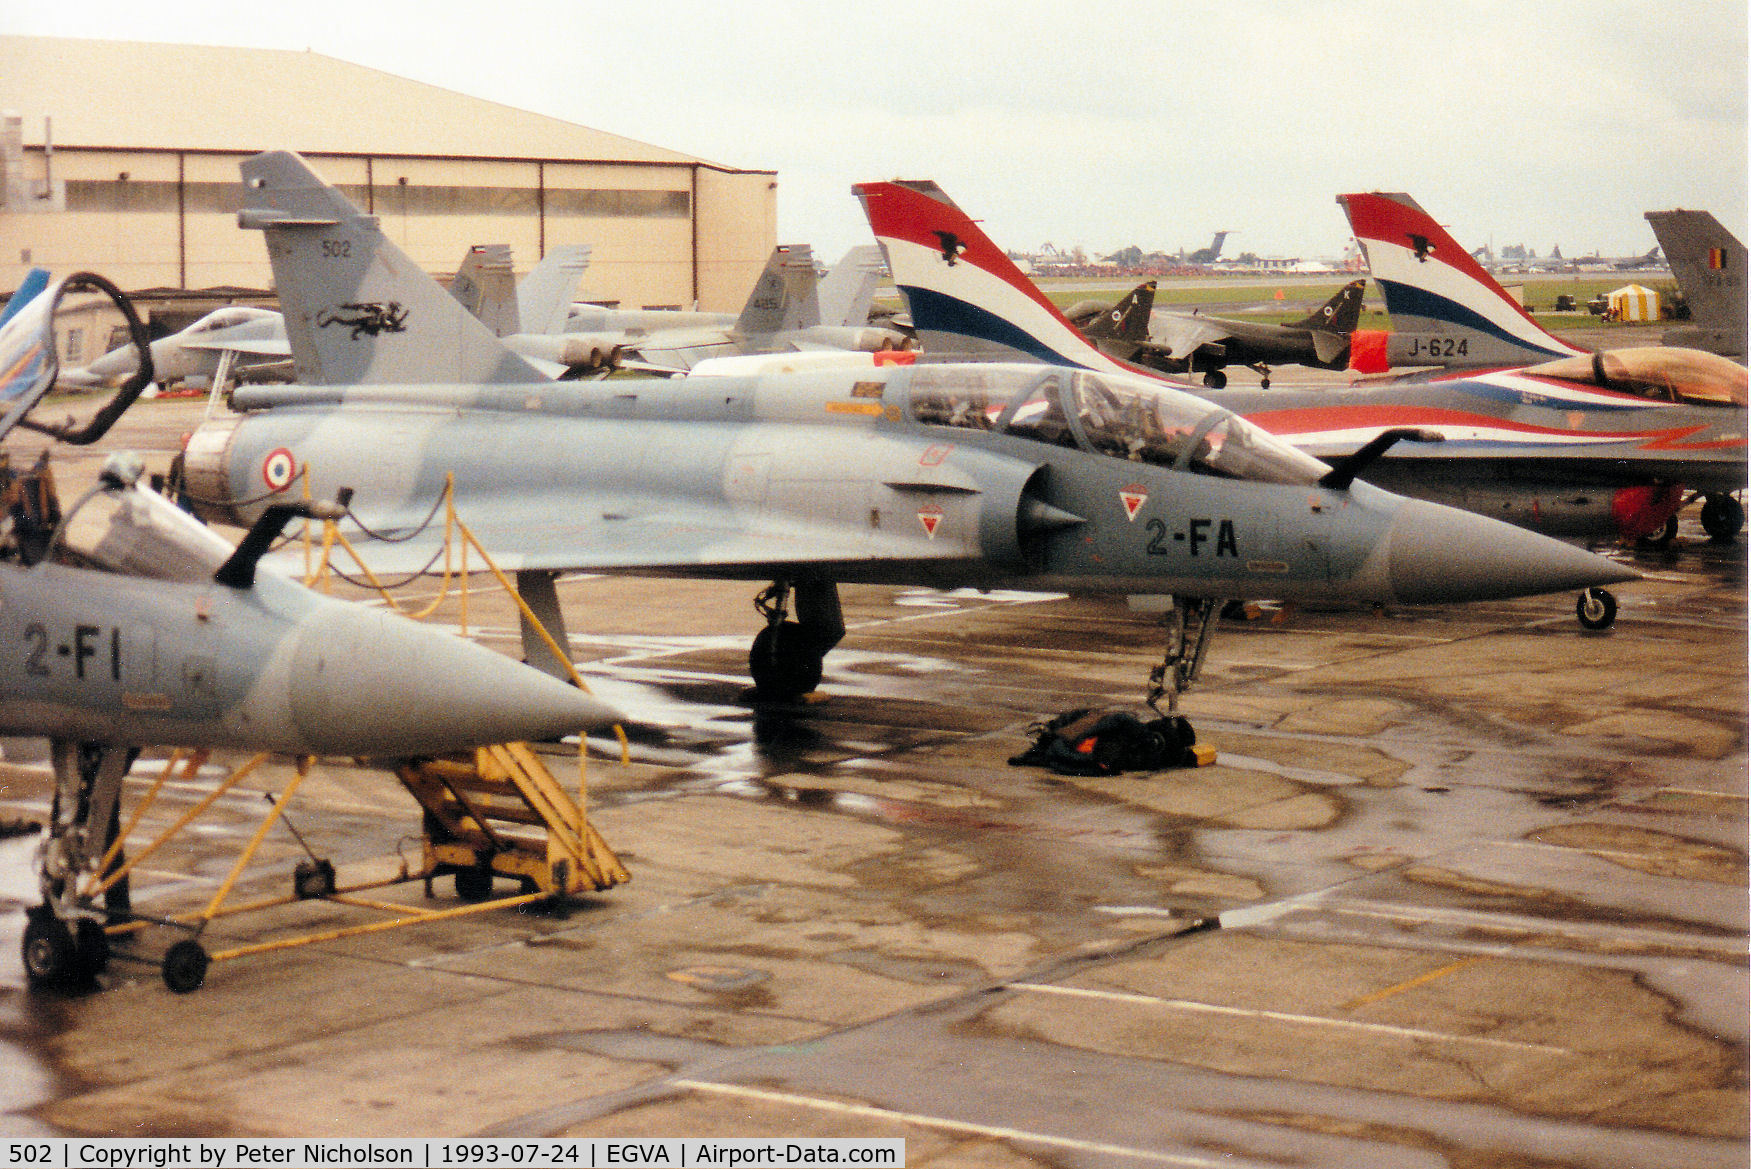 502, 1984 Dassault Mirage 2000B C/N 19, Mirage 2000B, callsign French Air Force 4200, of EC 2/2 on the flight-line at the 1993 Intnl Air Tattoo at RAF Fairford.